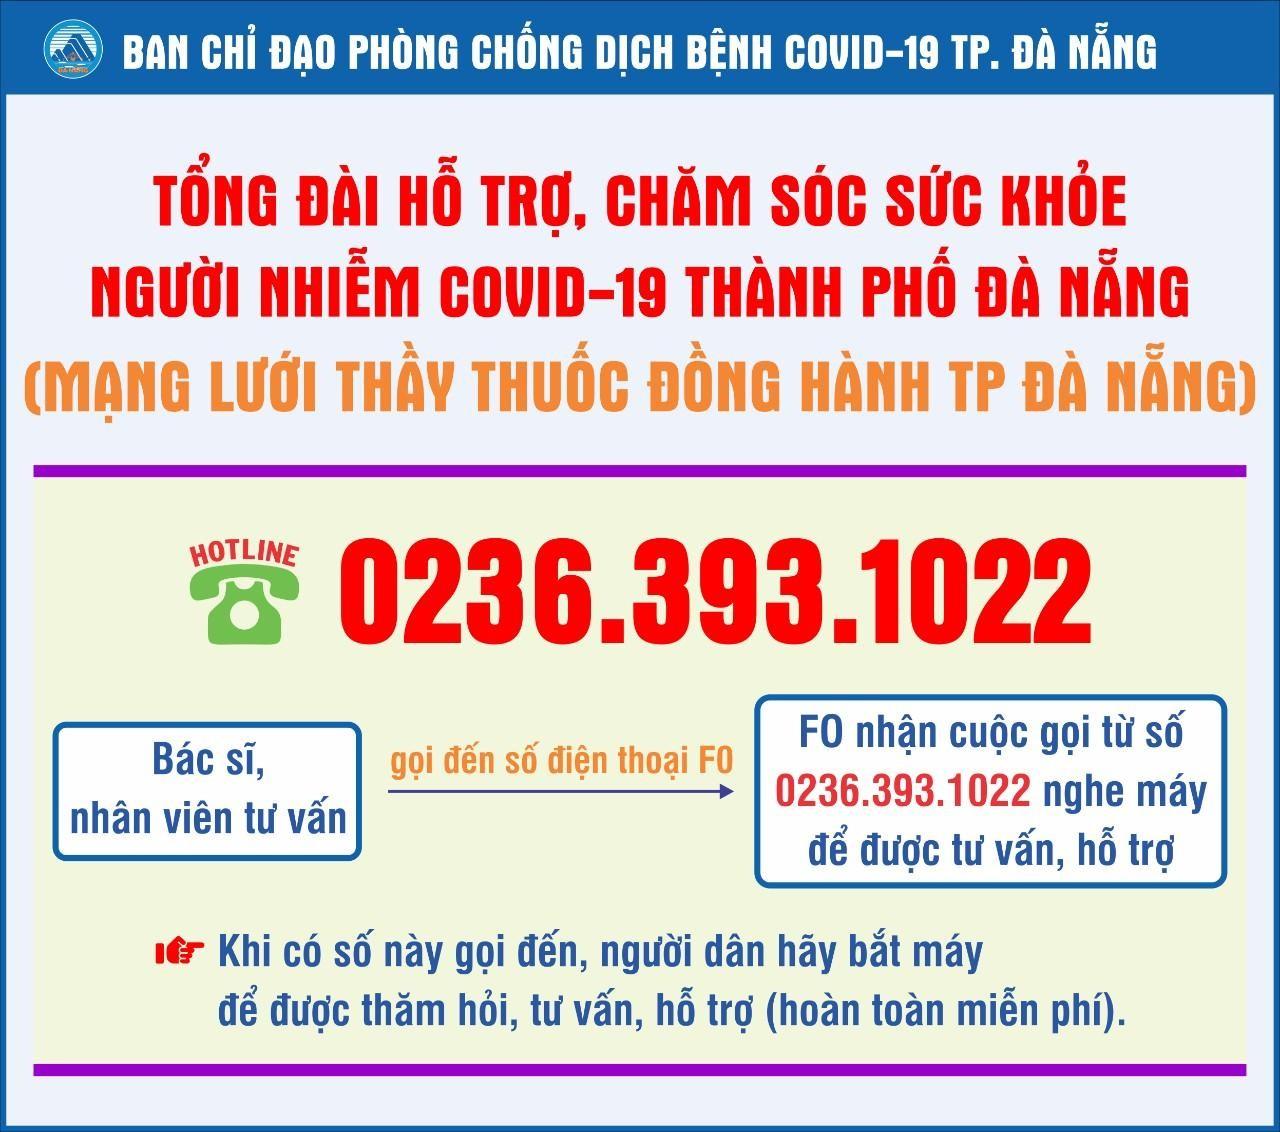 thay thuoc dong hanh